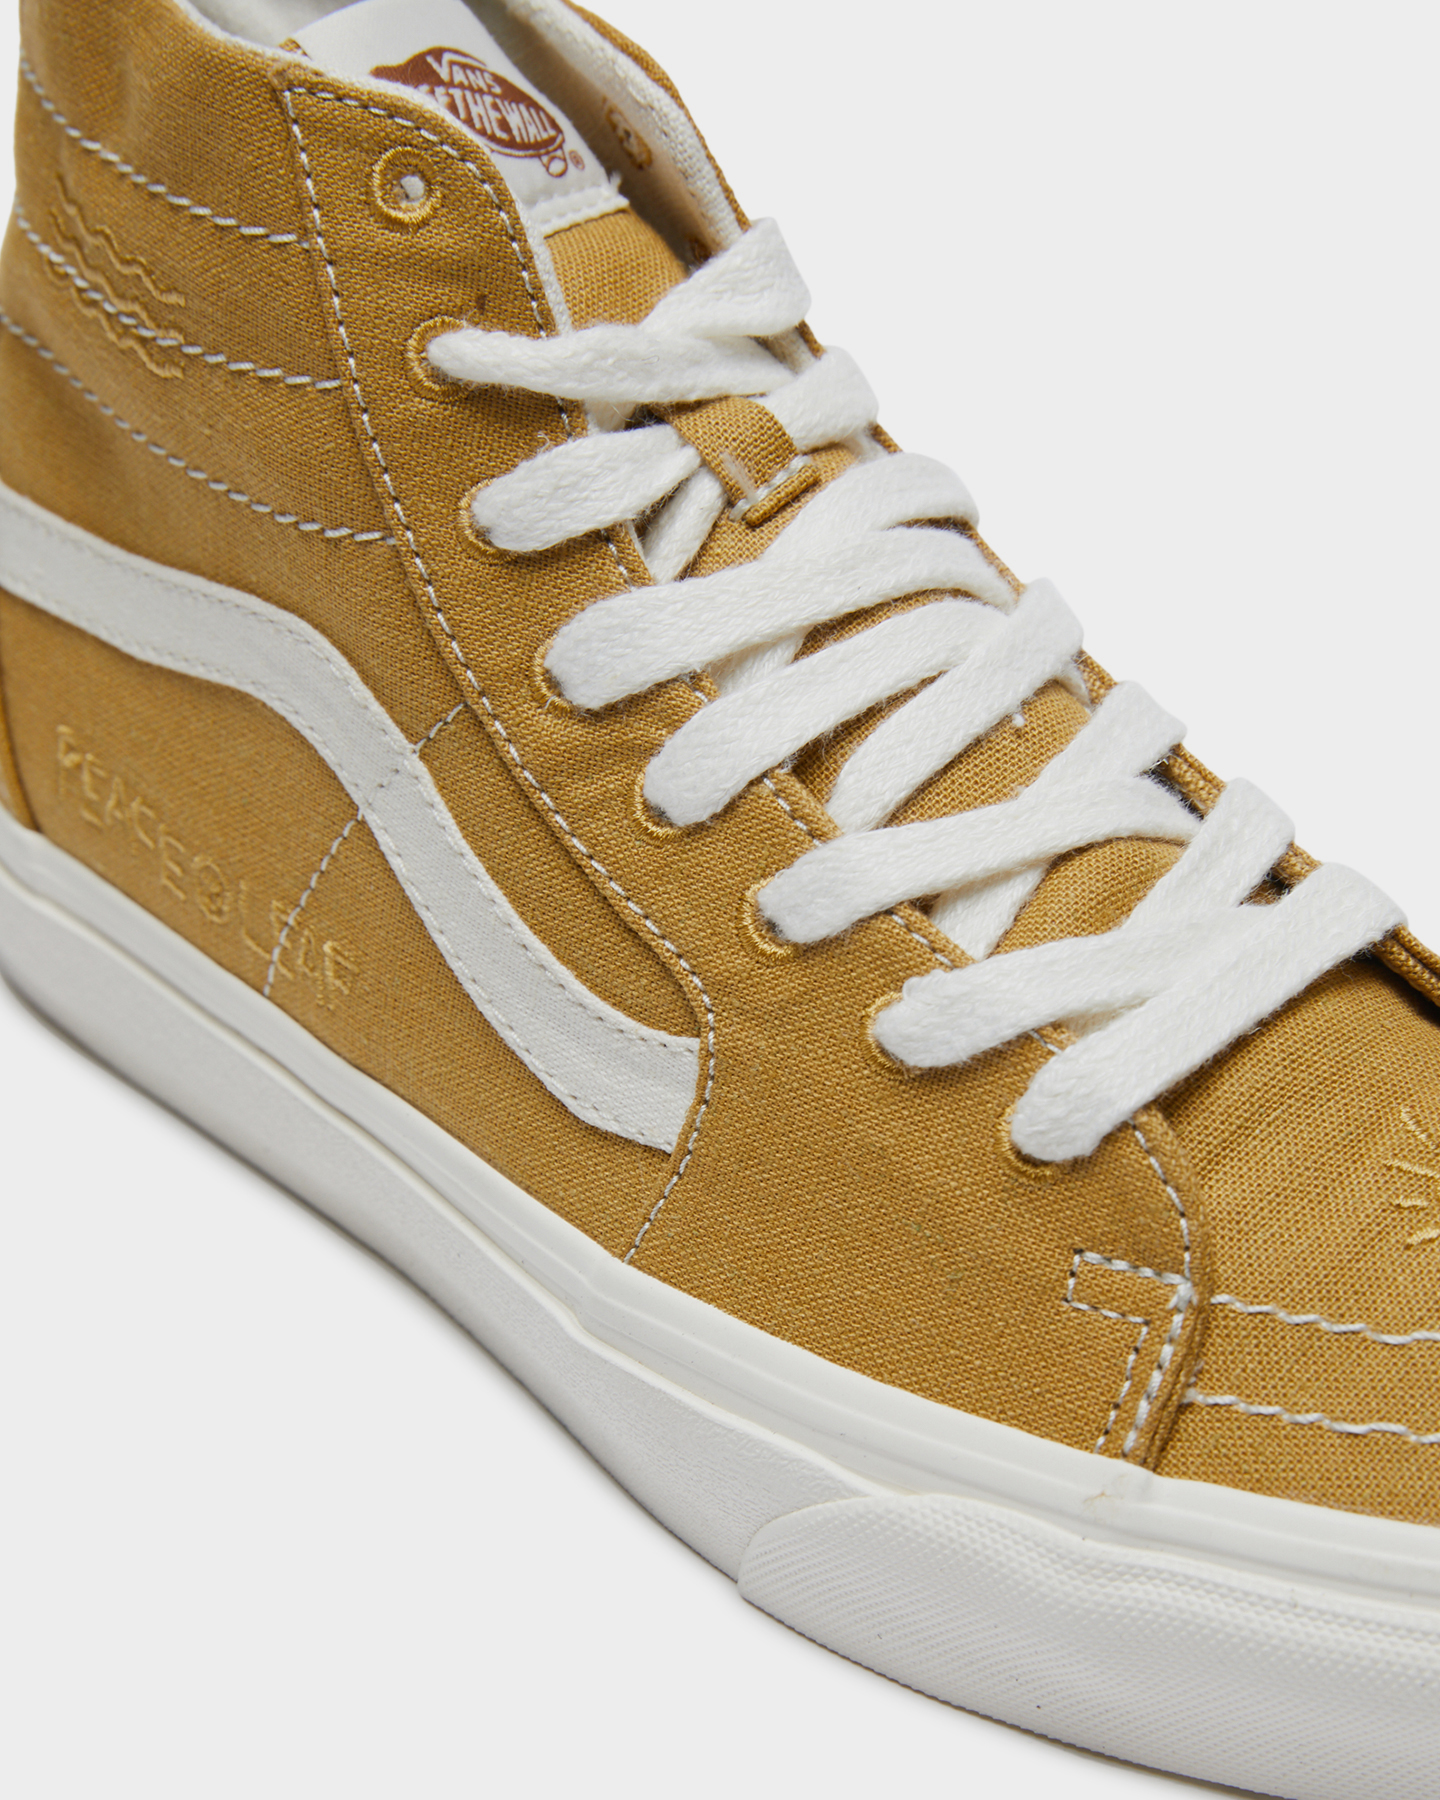 Vans Sk8-Hi Tapered Eco Theory Sneaker - Mustard Gold White | SurfStitch